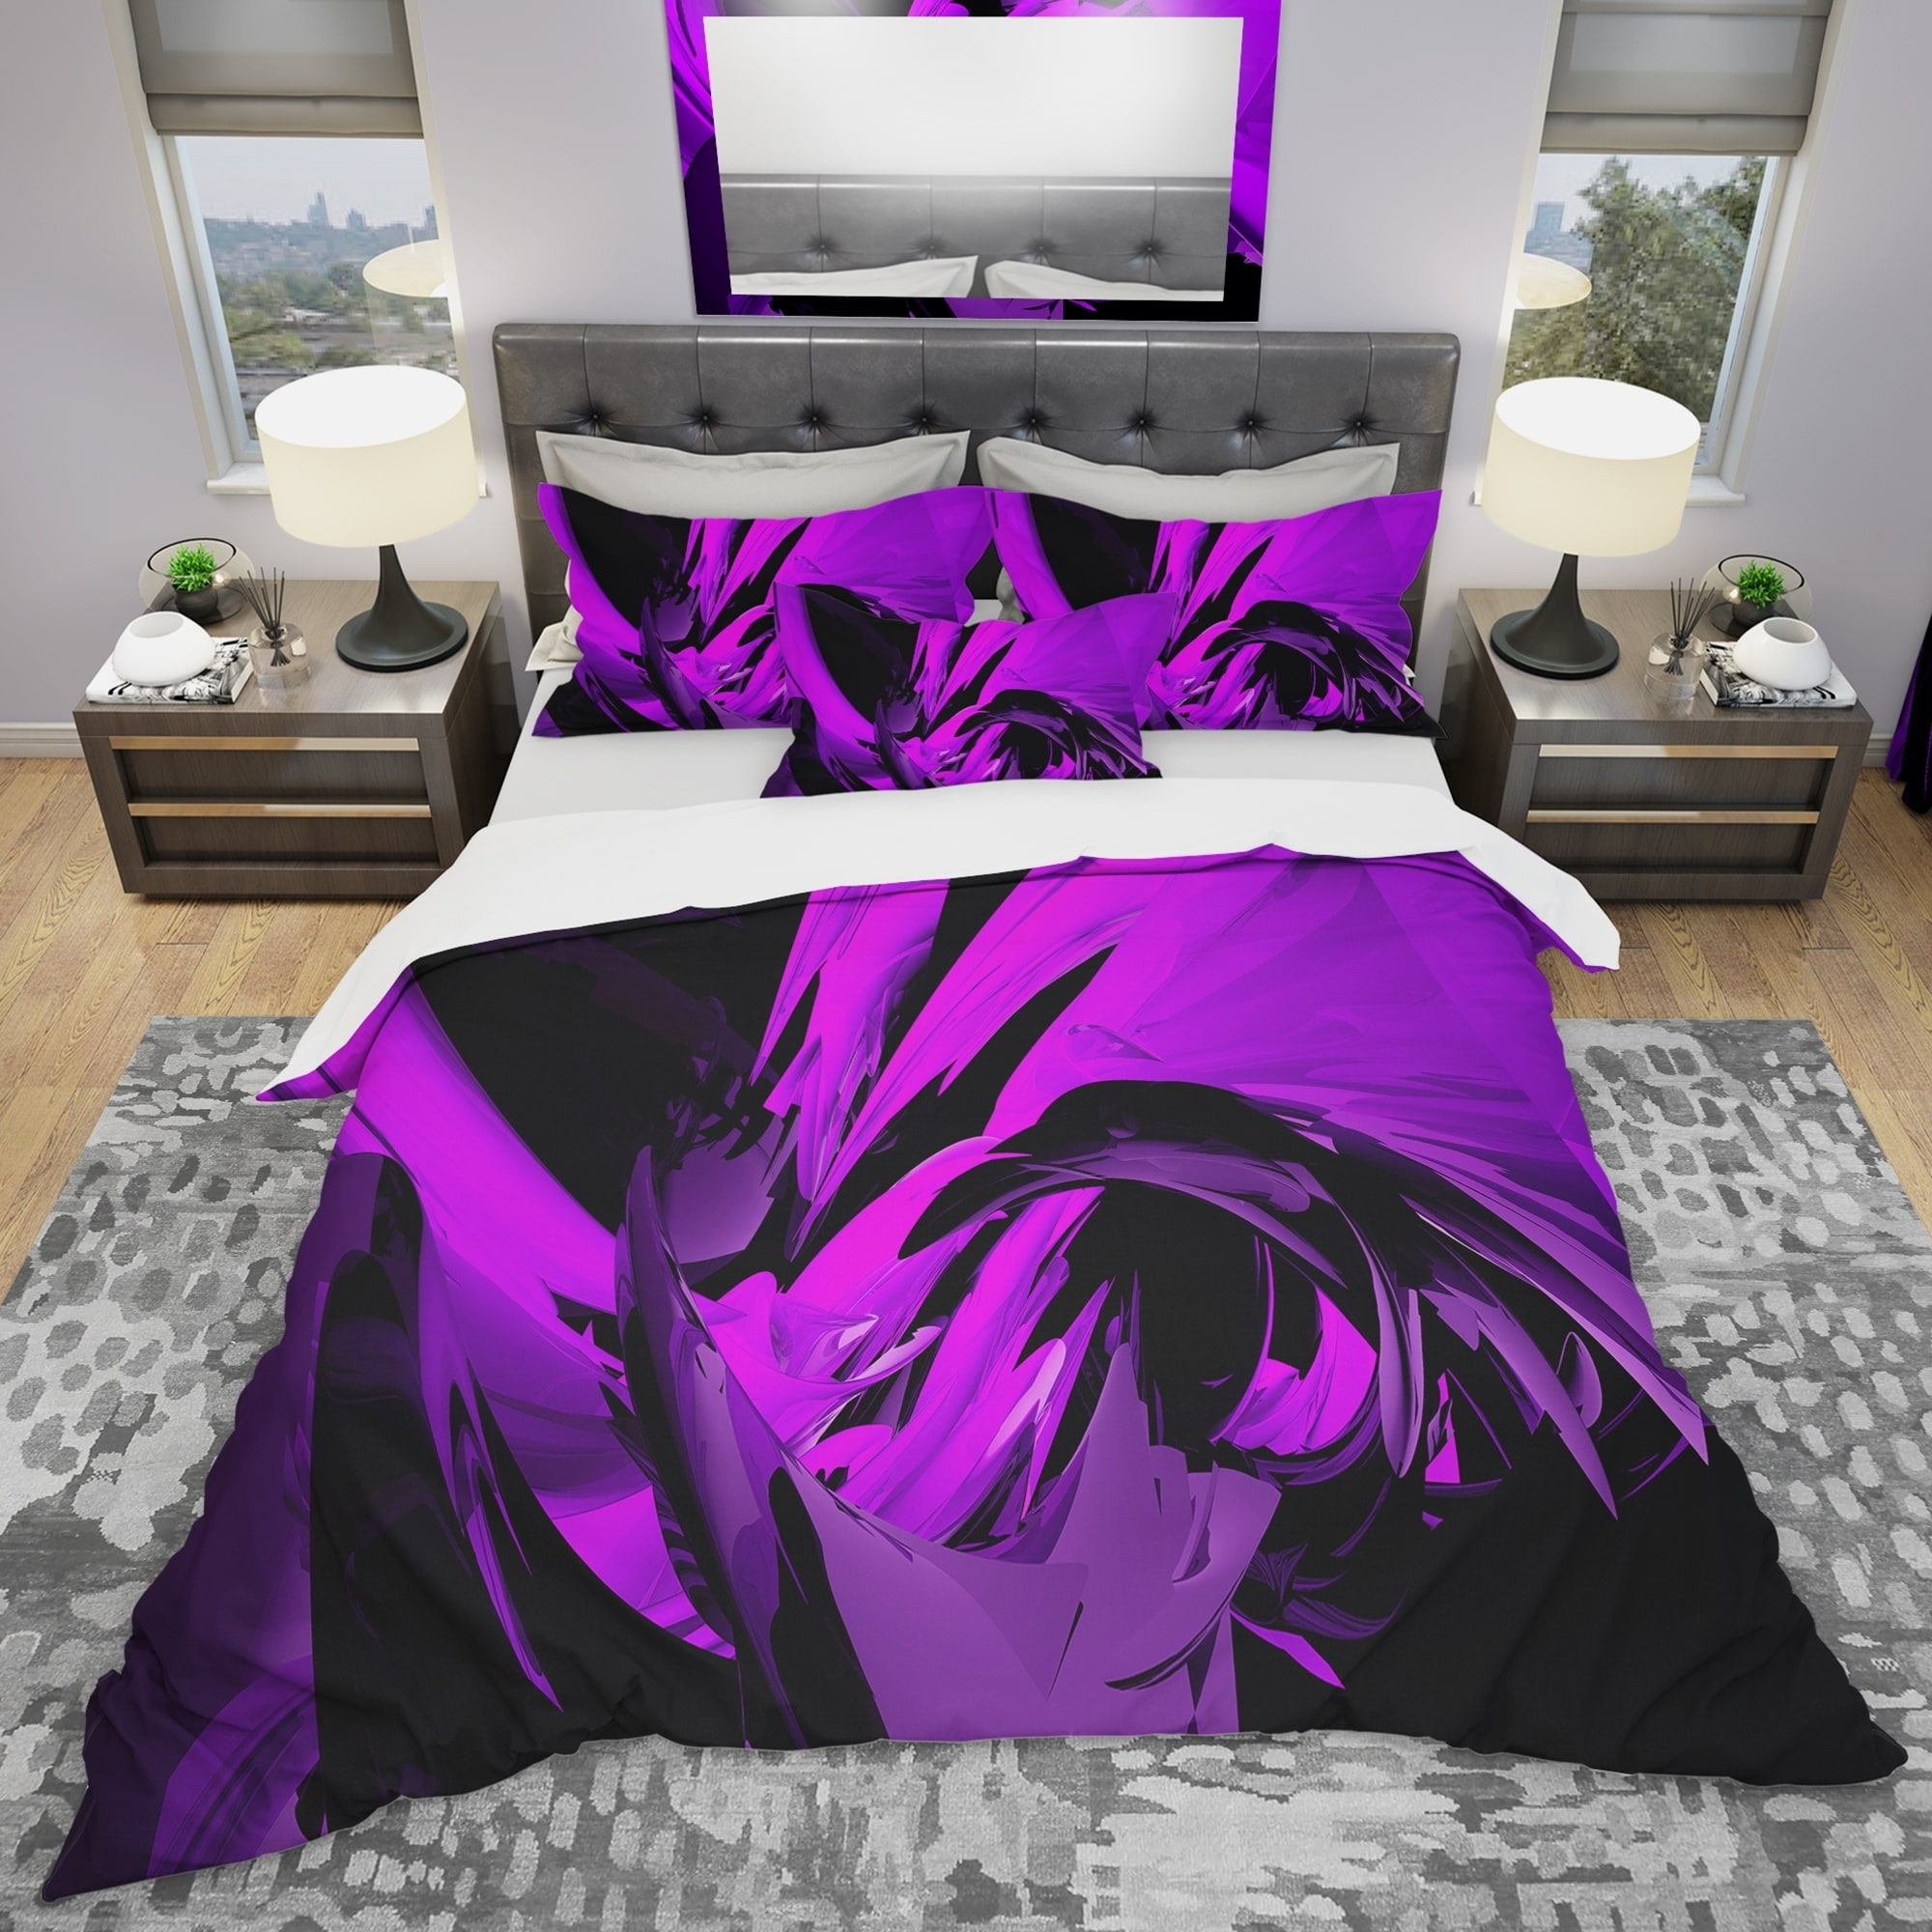 purple bedding sets with matching curtains